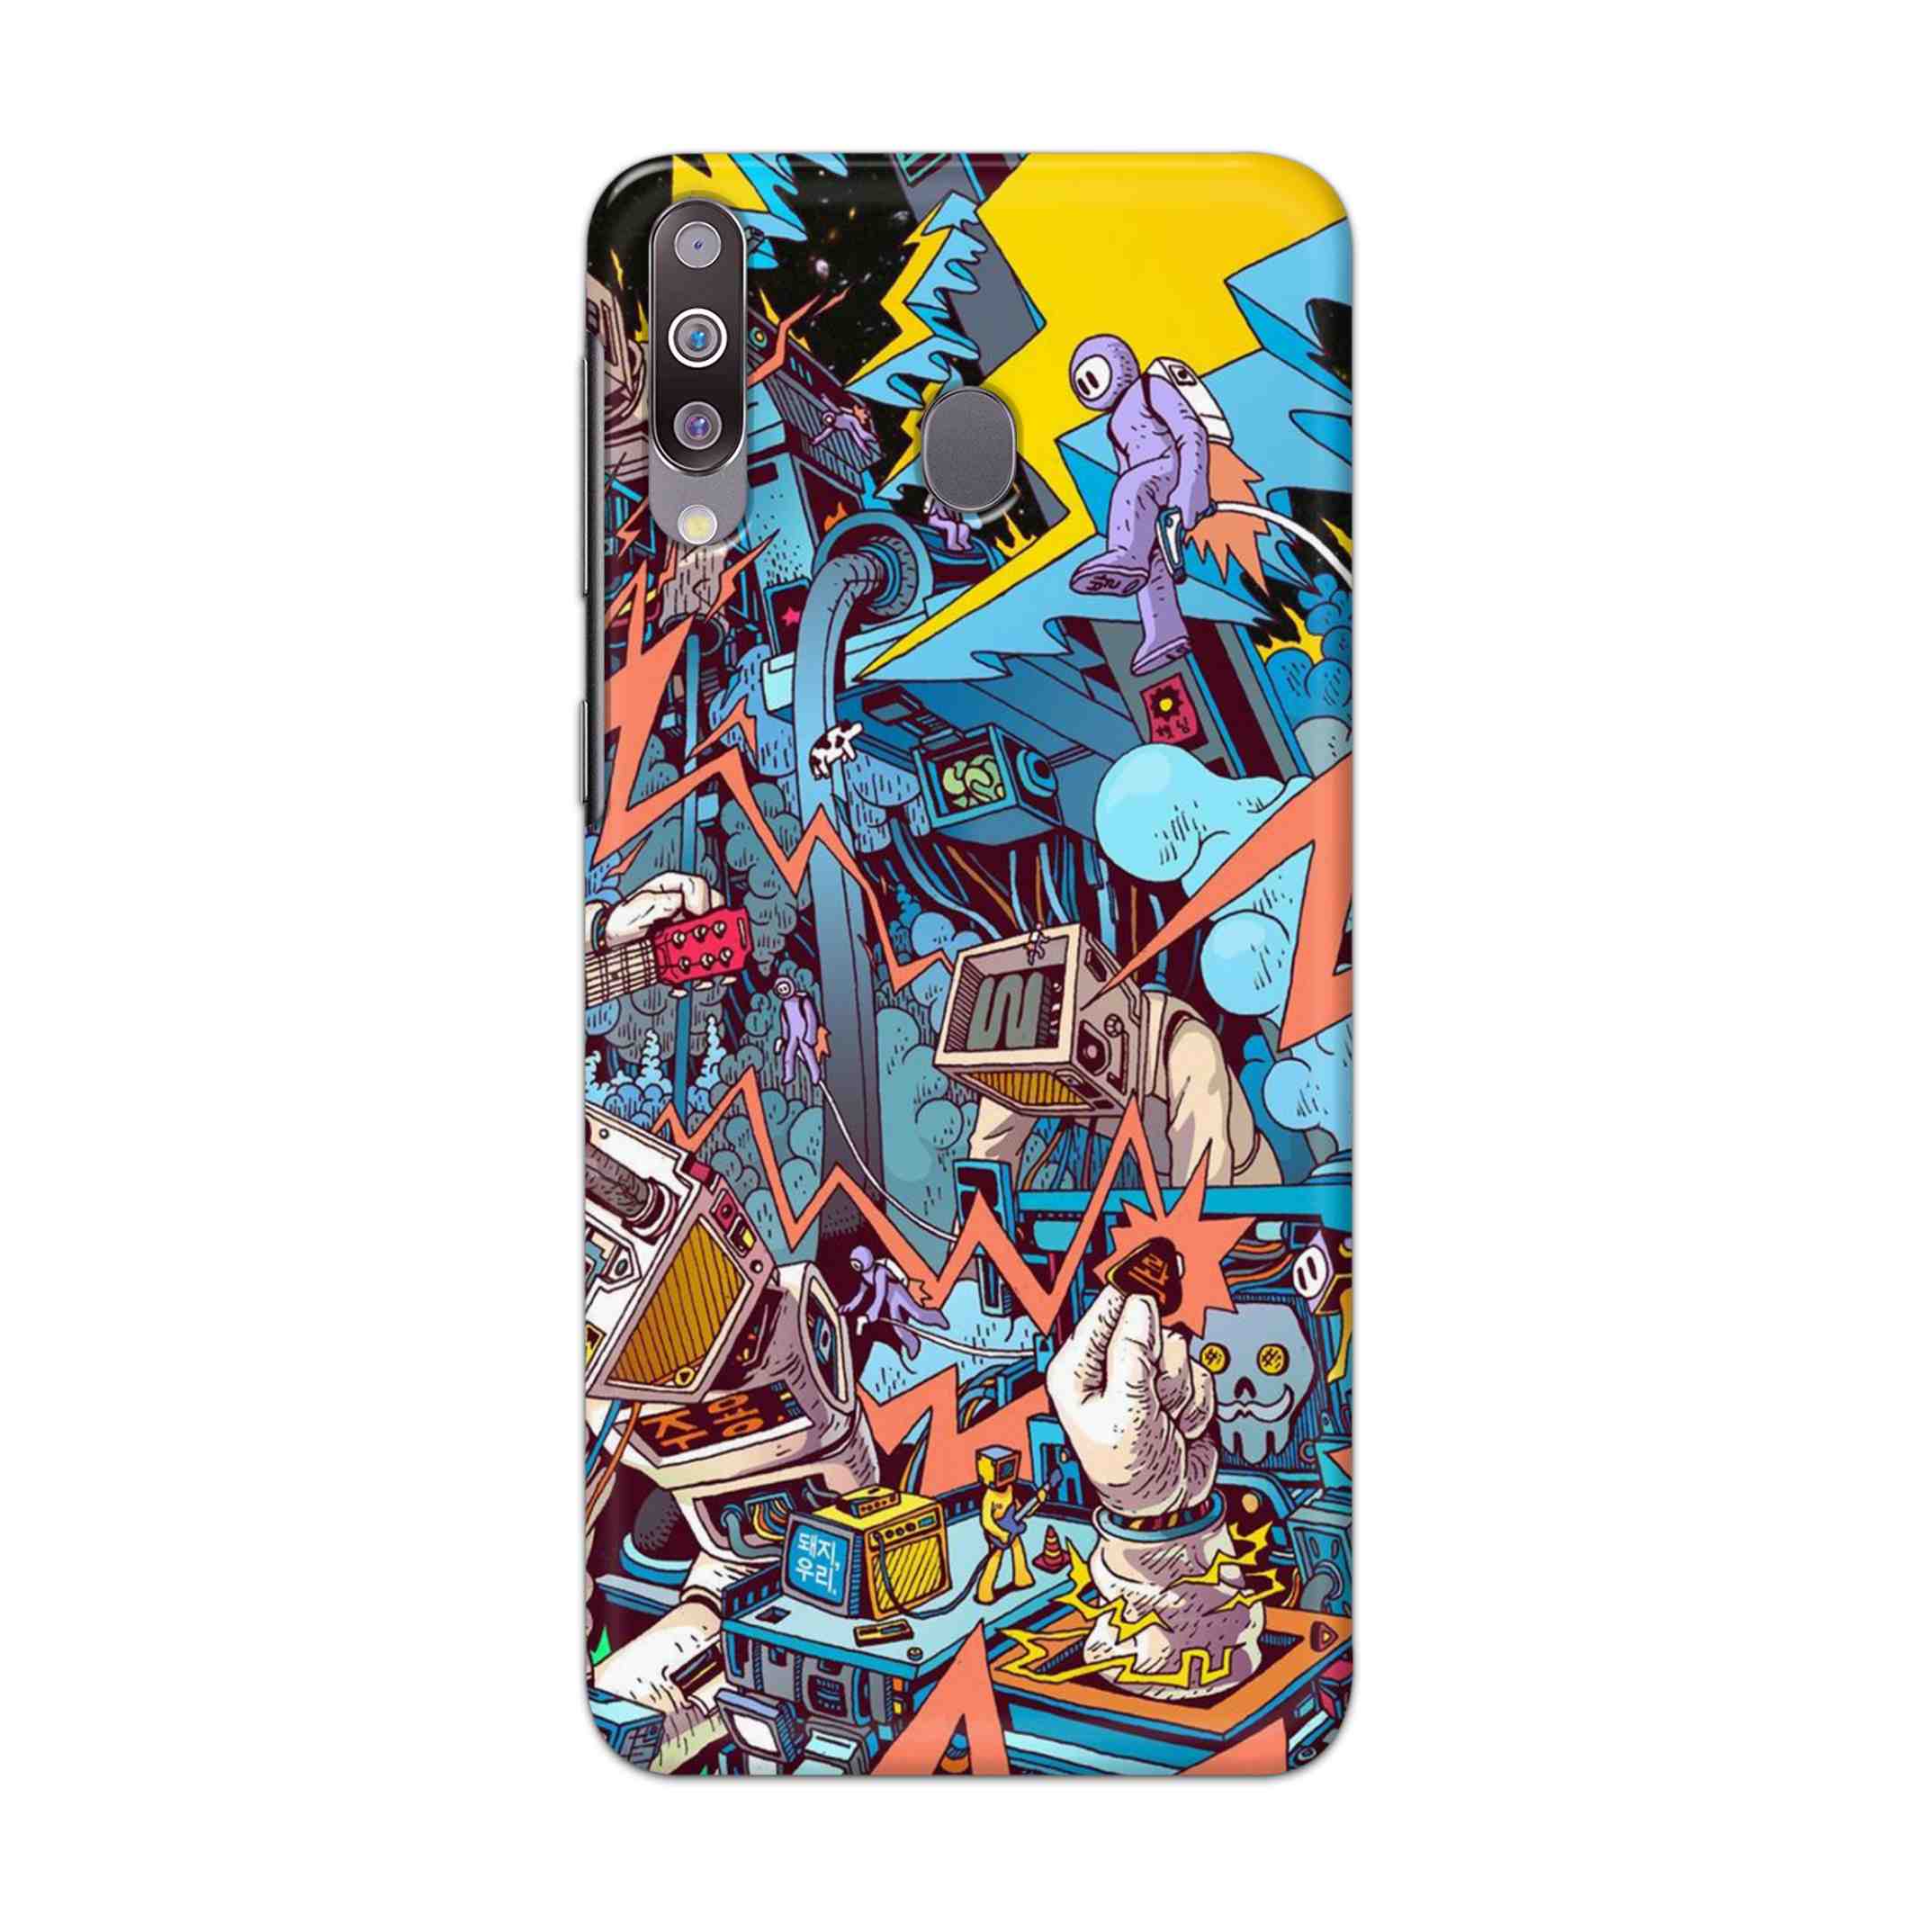 Buy Ofo Panic Hard Back Mobile Phone Case Cover For Samsung Galaxy M30 Online